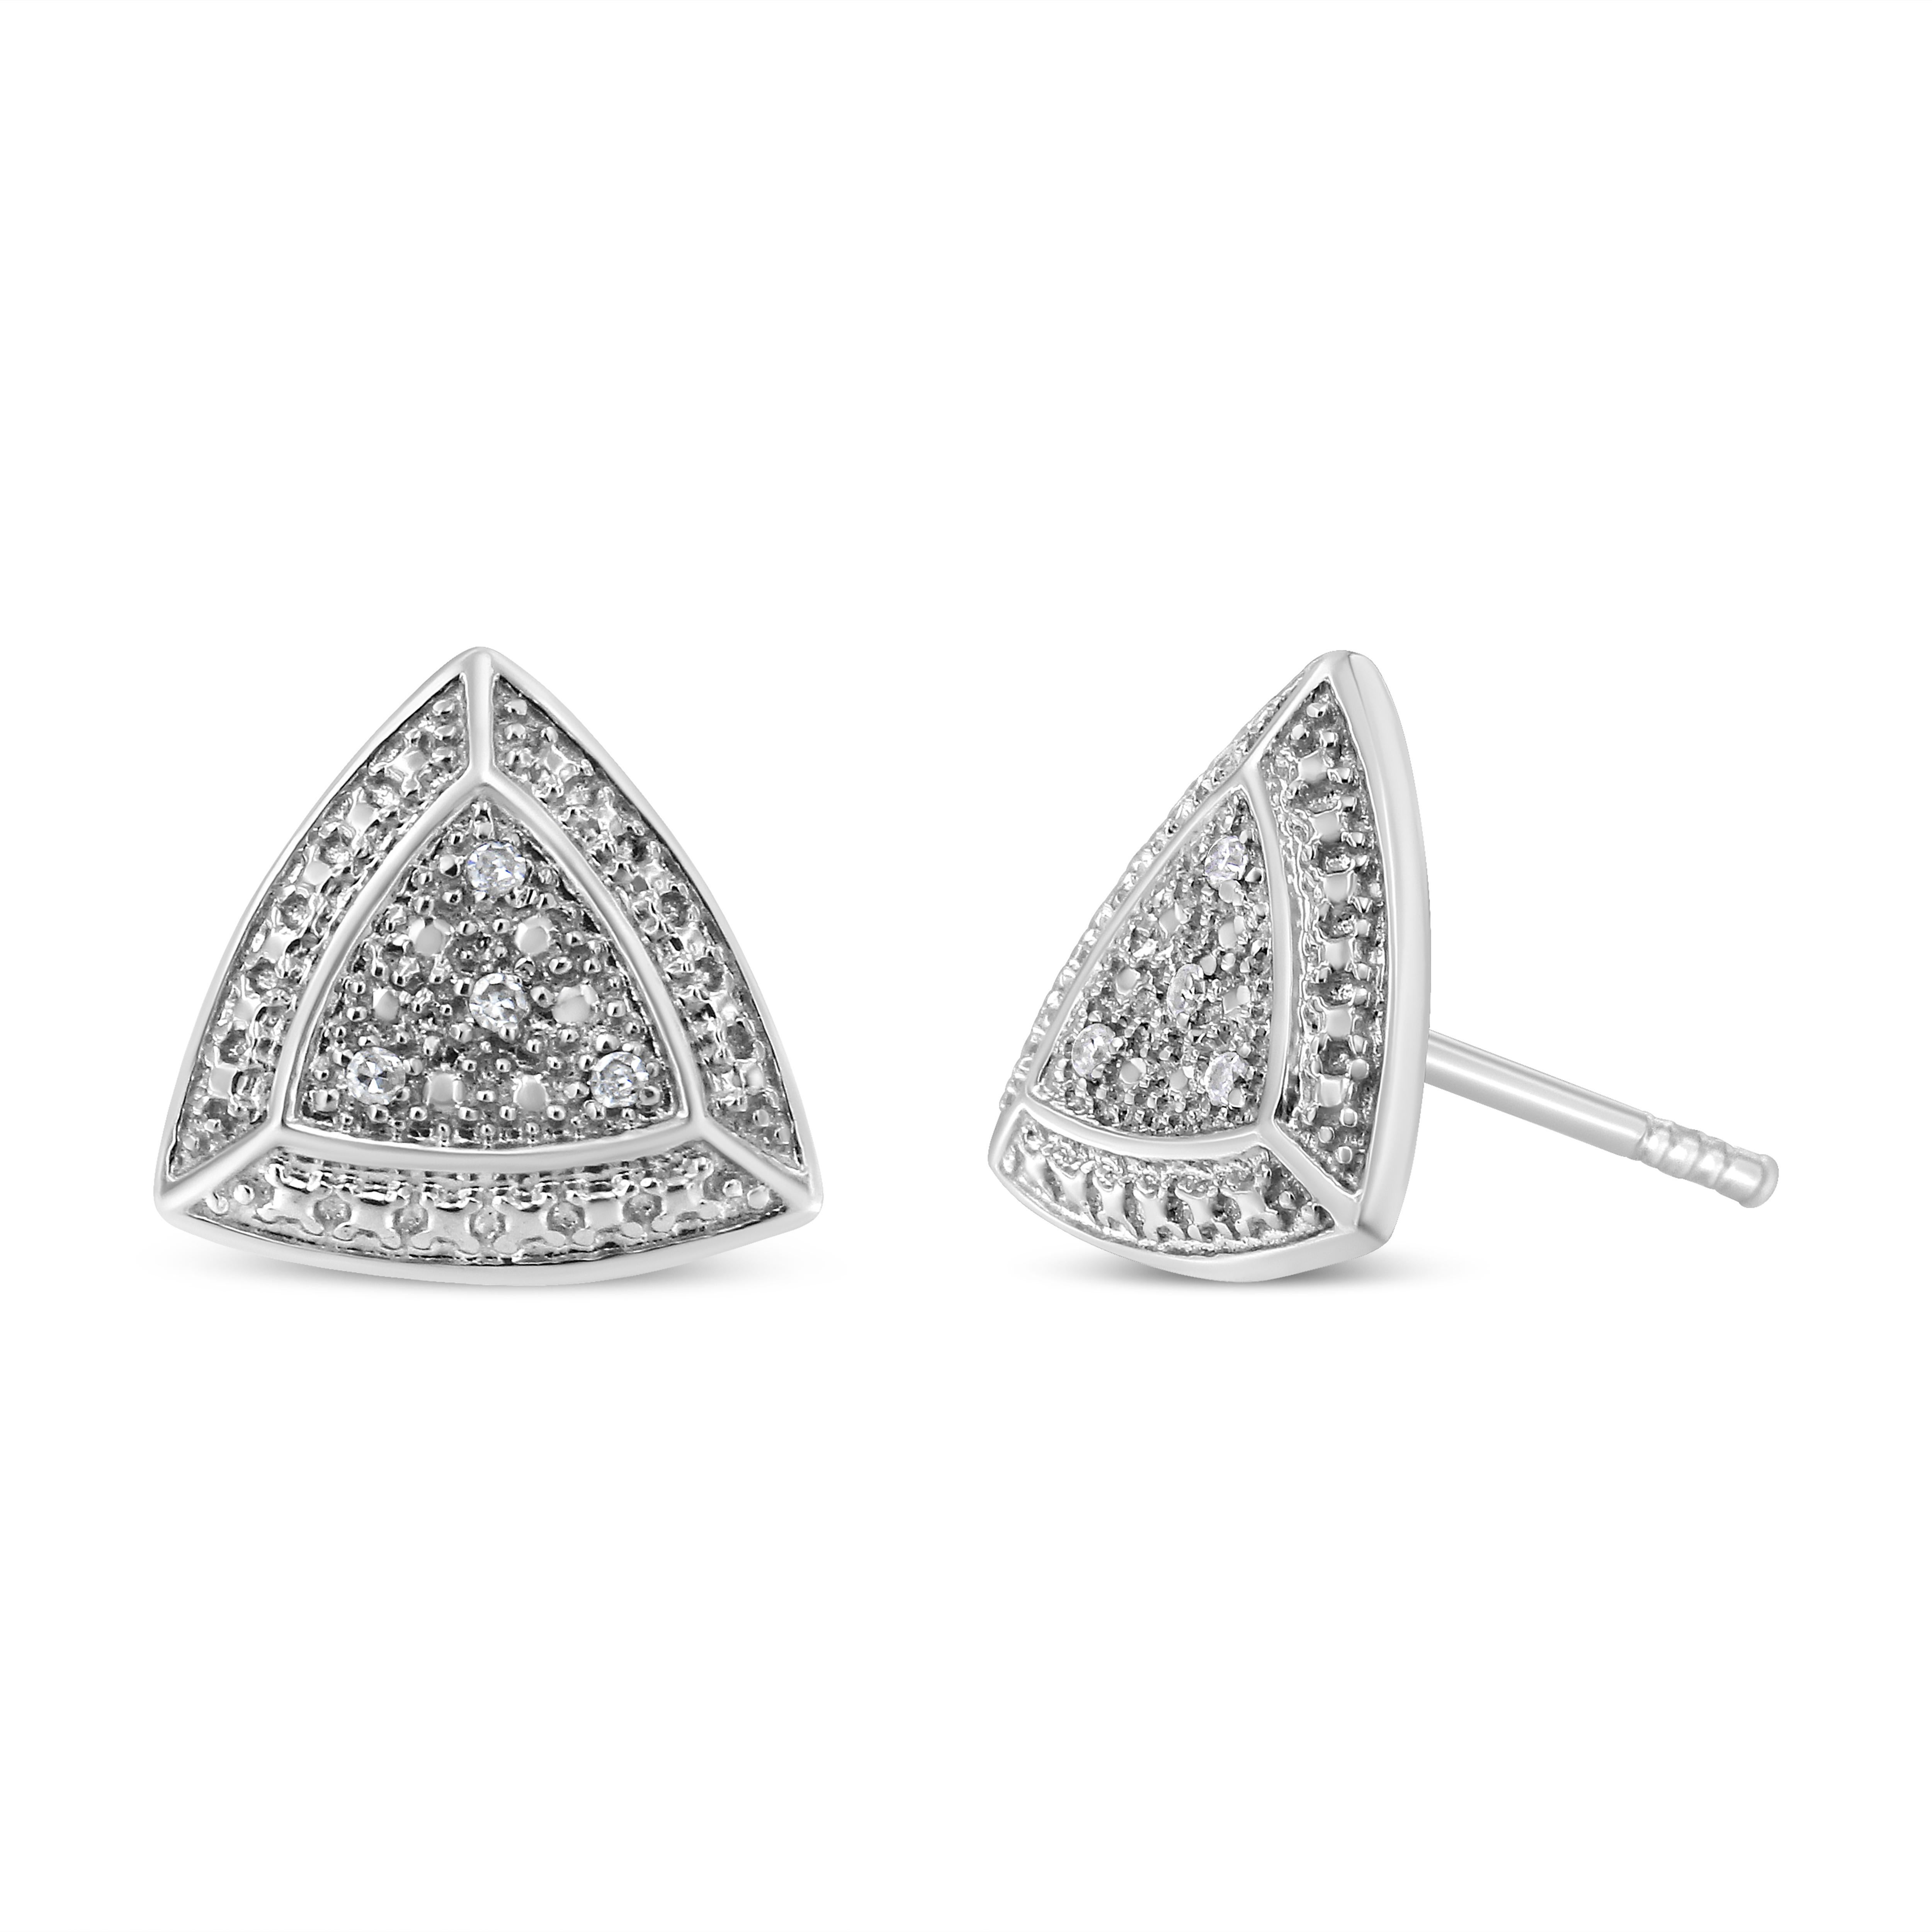 Brighten up your face by wearing these sterling silver stud earrings. Designed in a triangular shape, the pair of earrings is lavishly enriched with pave set round cut diamonds. Defining true elegance with unmatched craftsmanship, the jewel comes